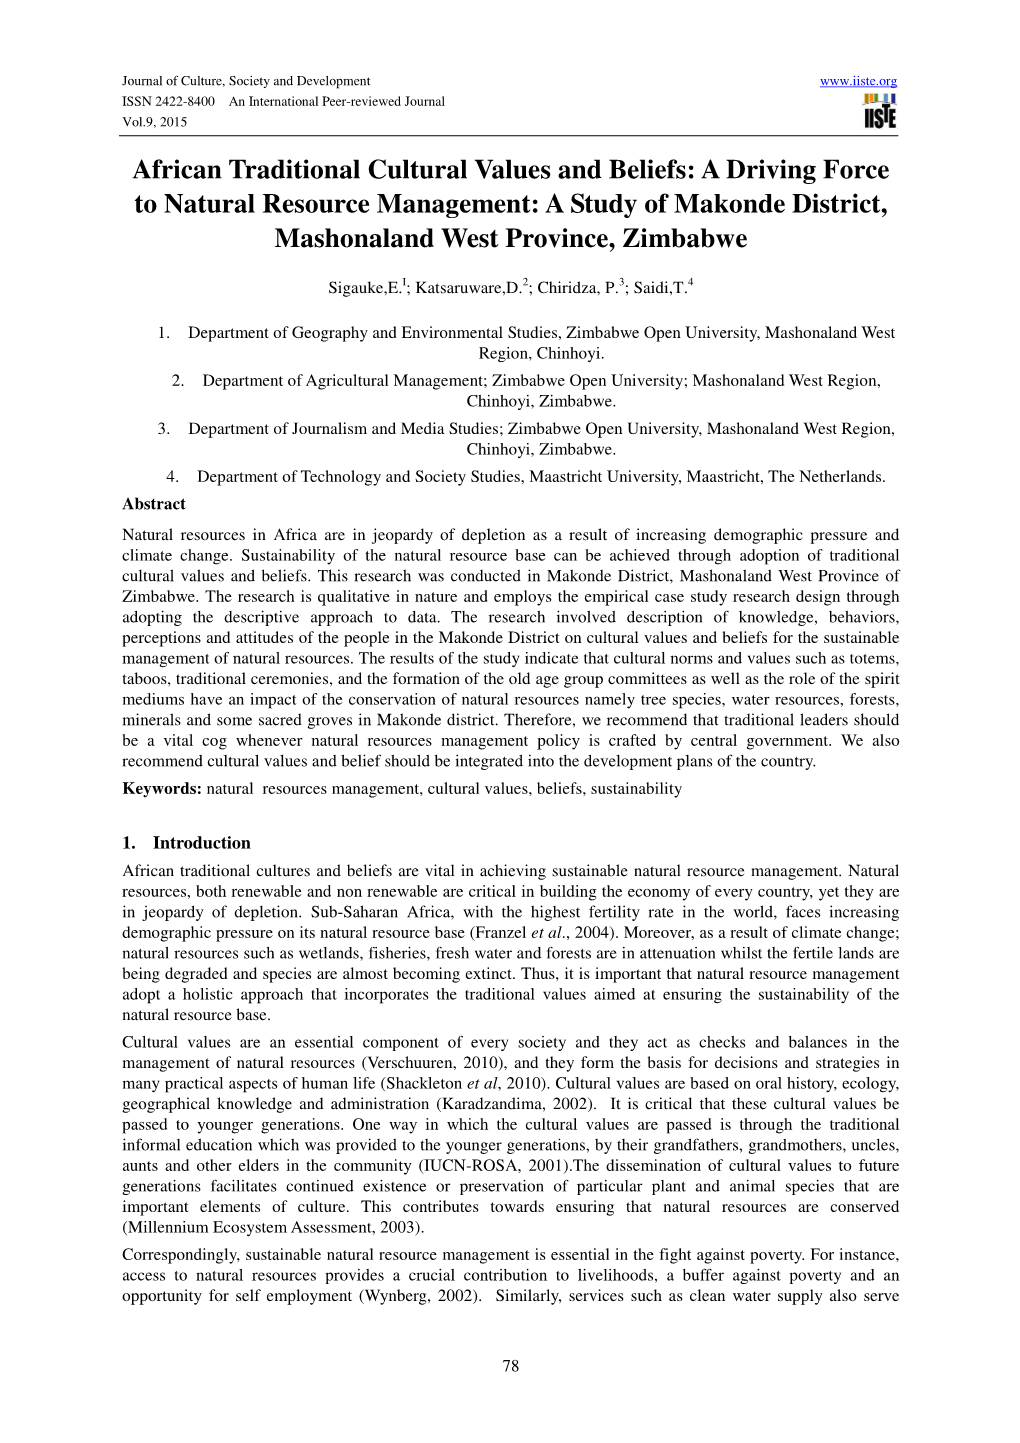 African Traditional Cultural Values and Beliefs: a Driving Force to Natural Resource Management: a Study of Makonde District, Mashonaland West Province, Zimbabwe